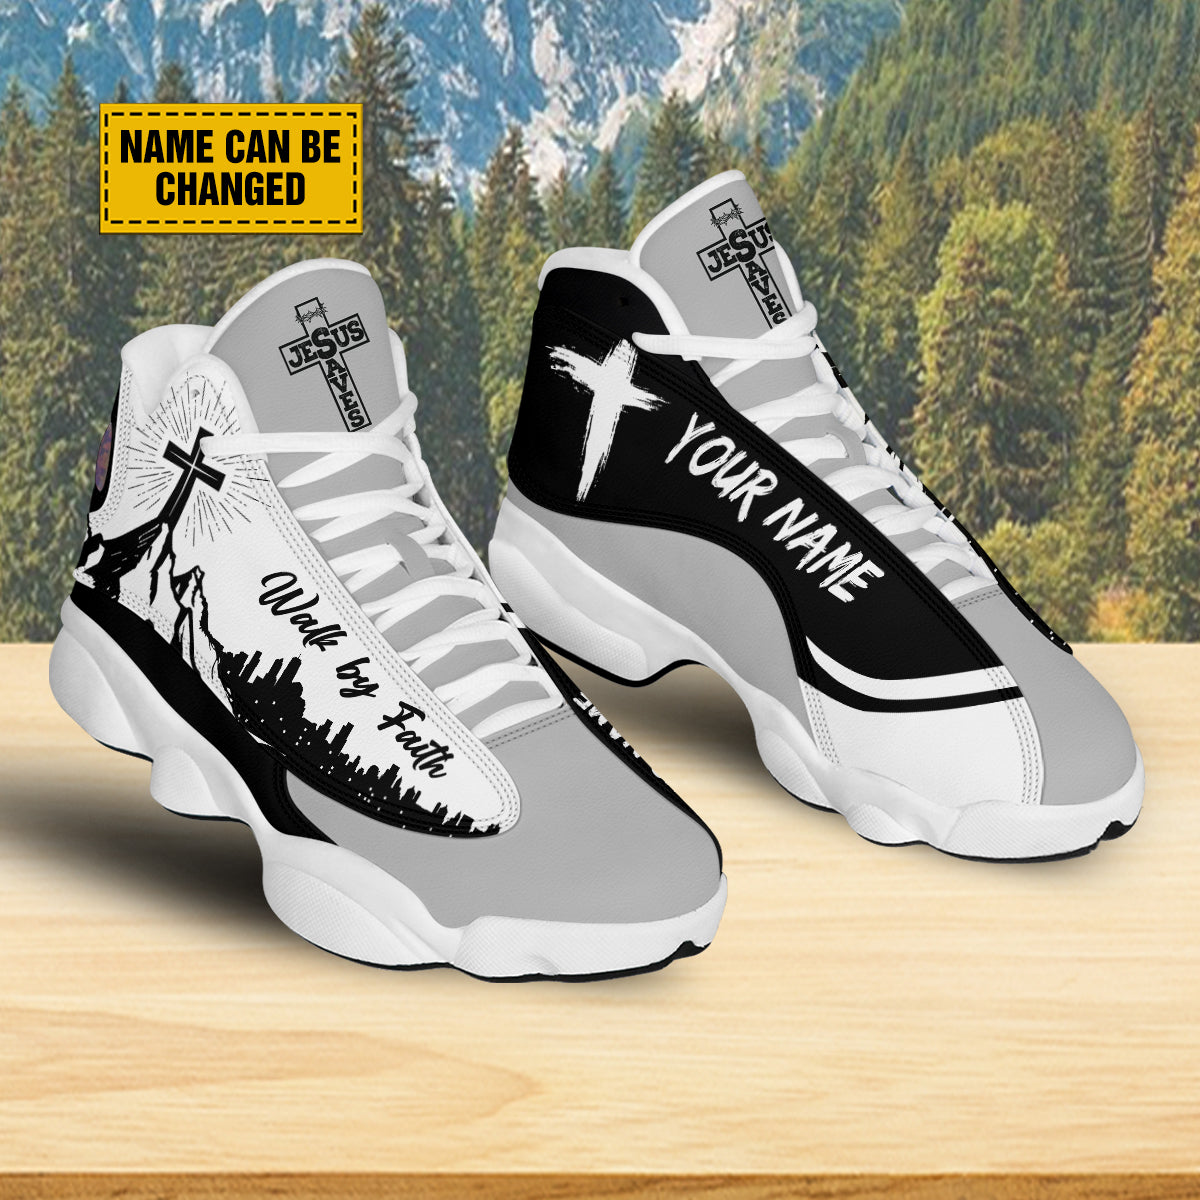 Teesdily | Personalized Jesus Walk By Faith Basketball Shoes, Jesus Cross Mountain Basketball Sneaker, Christian Footwear Unisex Basketball Shoes With Thick Soles